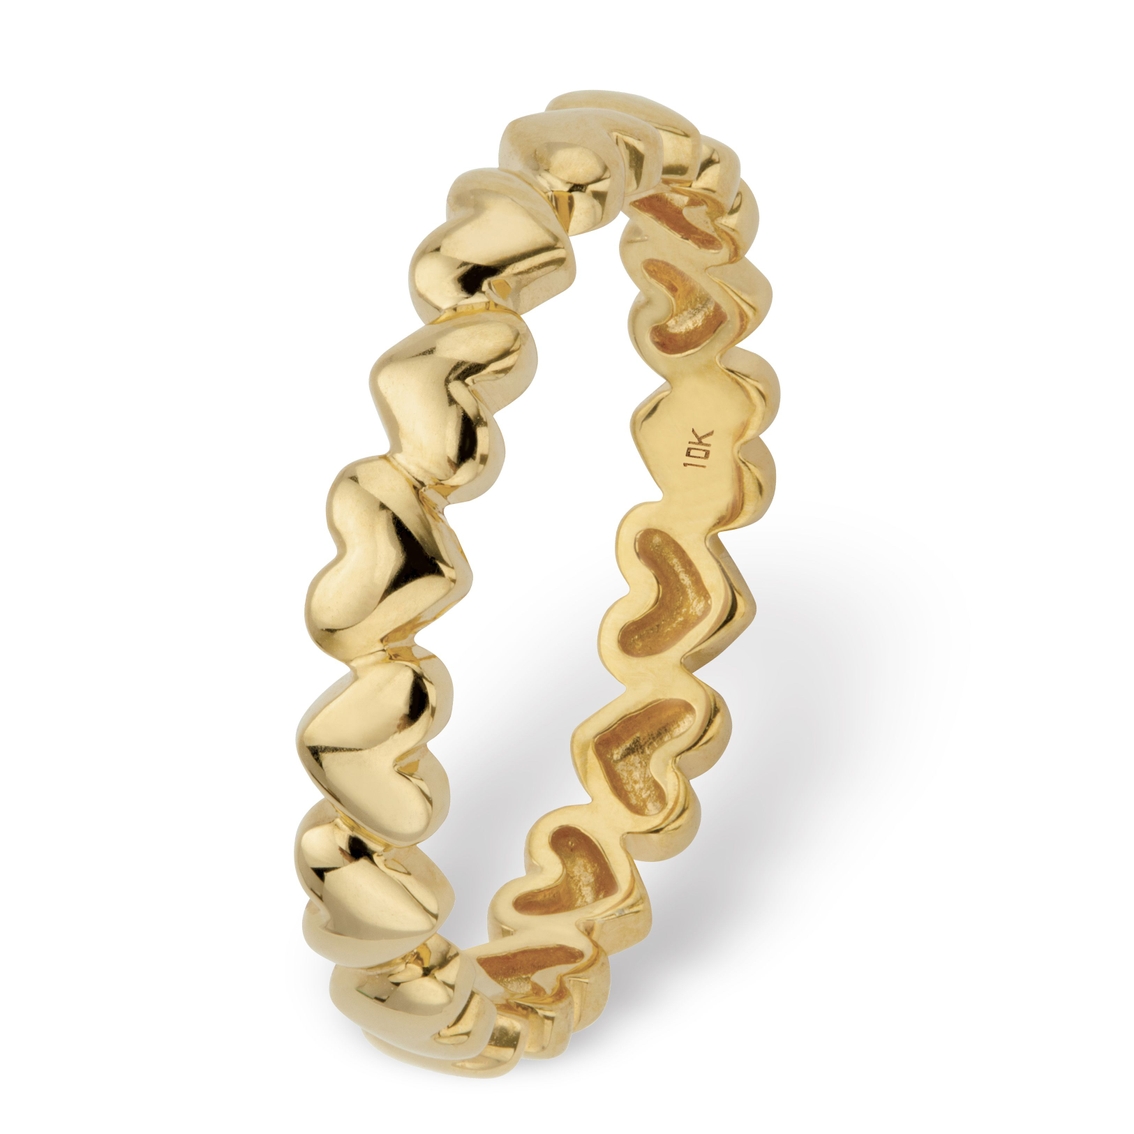 Polished Heart-Link Eternity Ring in Solid 10k Yellow Gold - Image 2 of 5